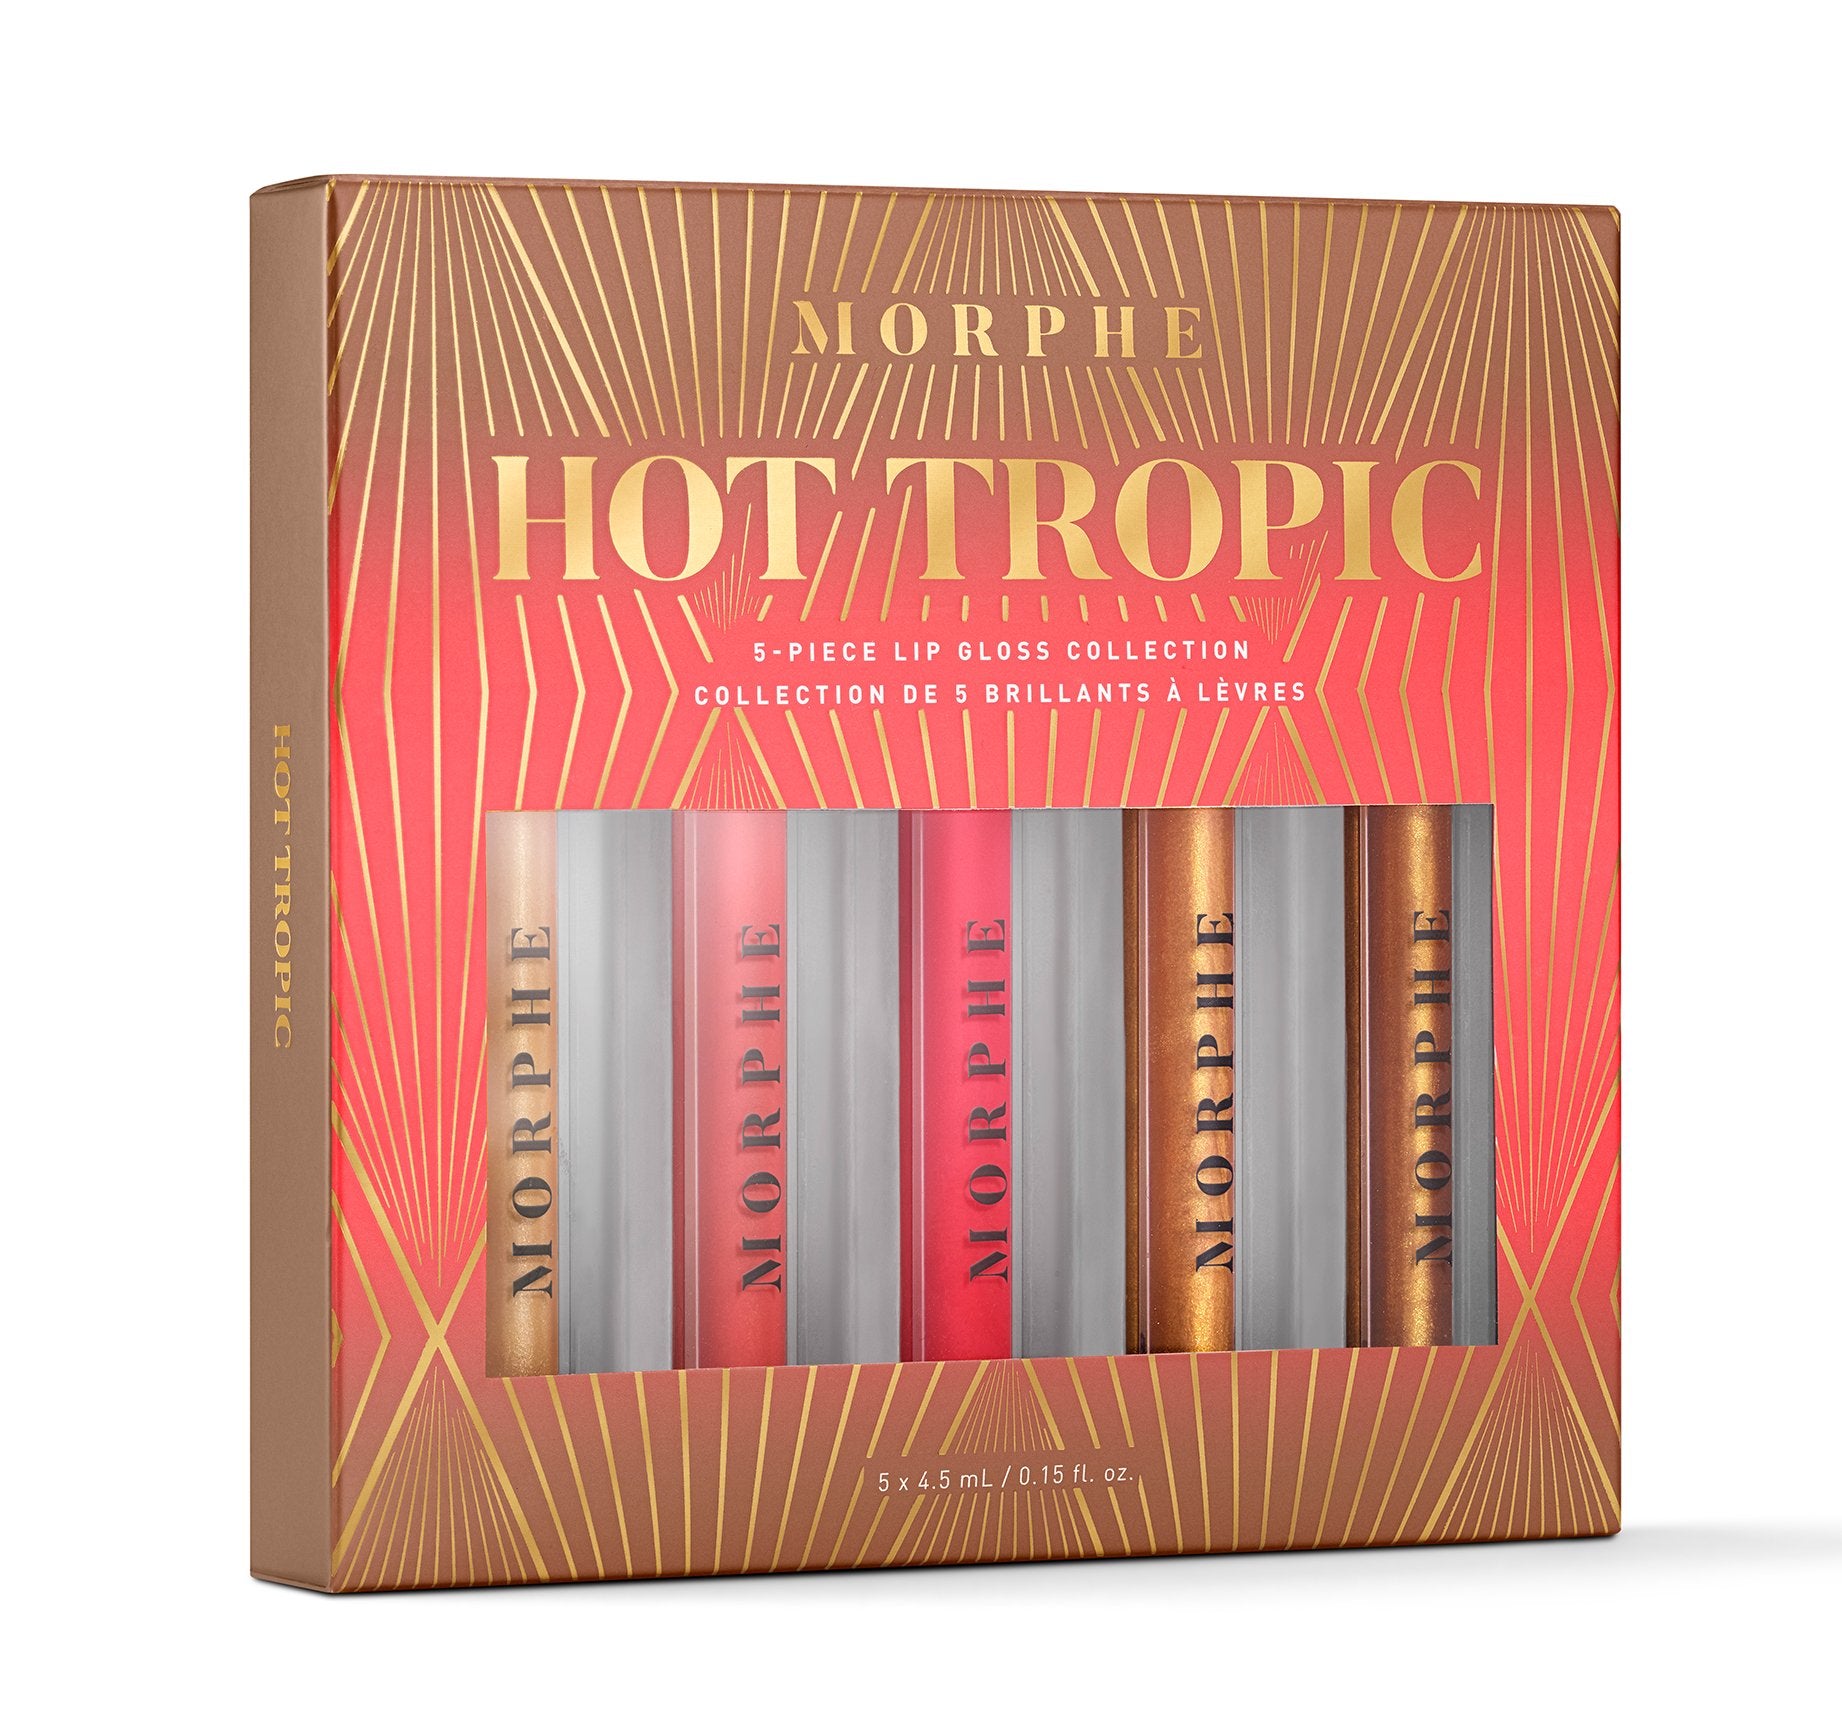 Hot Tropic Lip Gloss Collection